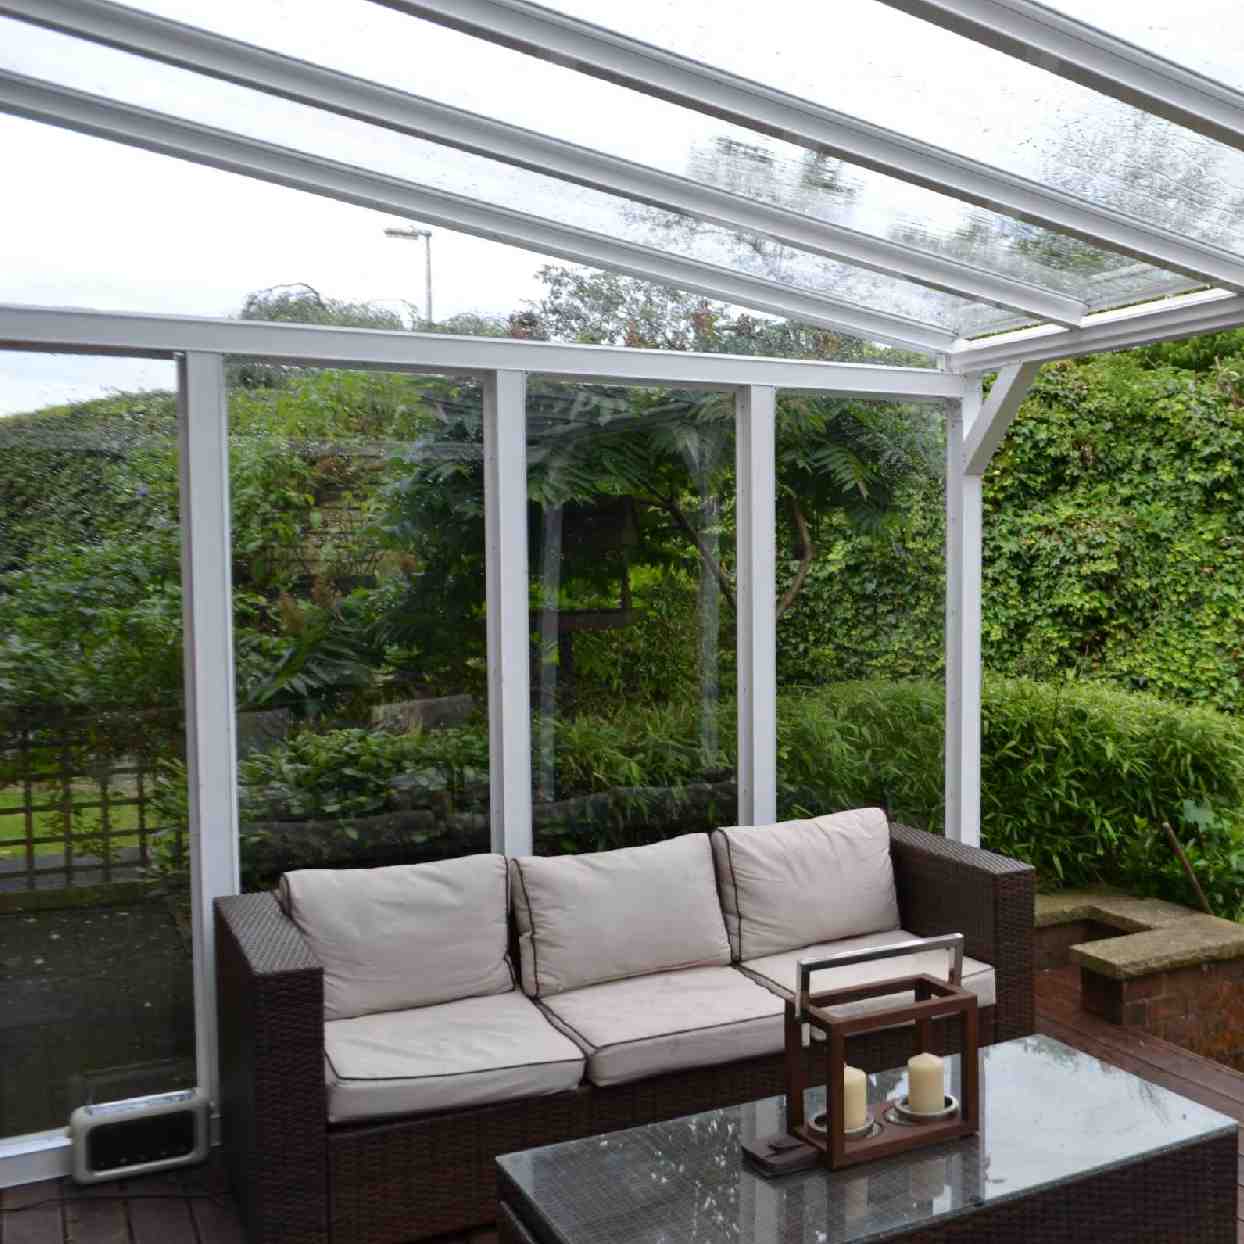 Buy Omega Verandah White with 16mm Polycarbonate Glazing - 6.0m (W) x 2.5m (P), (3) Supporting Posts online today